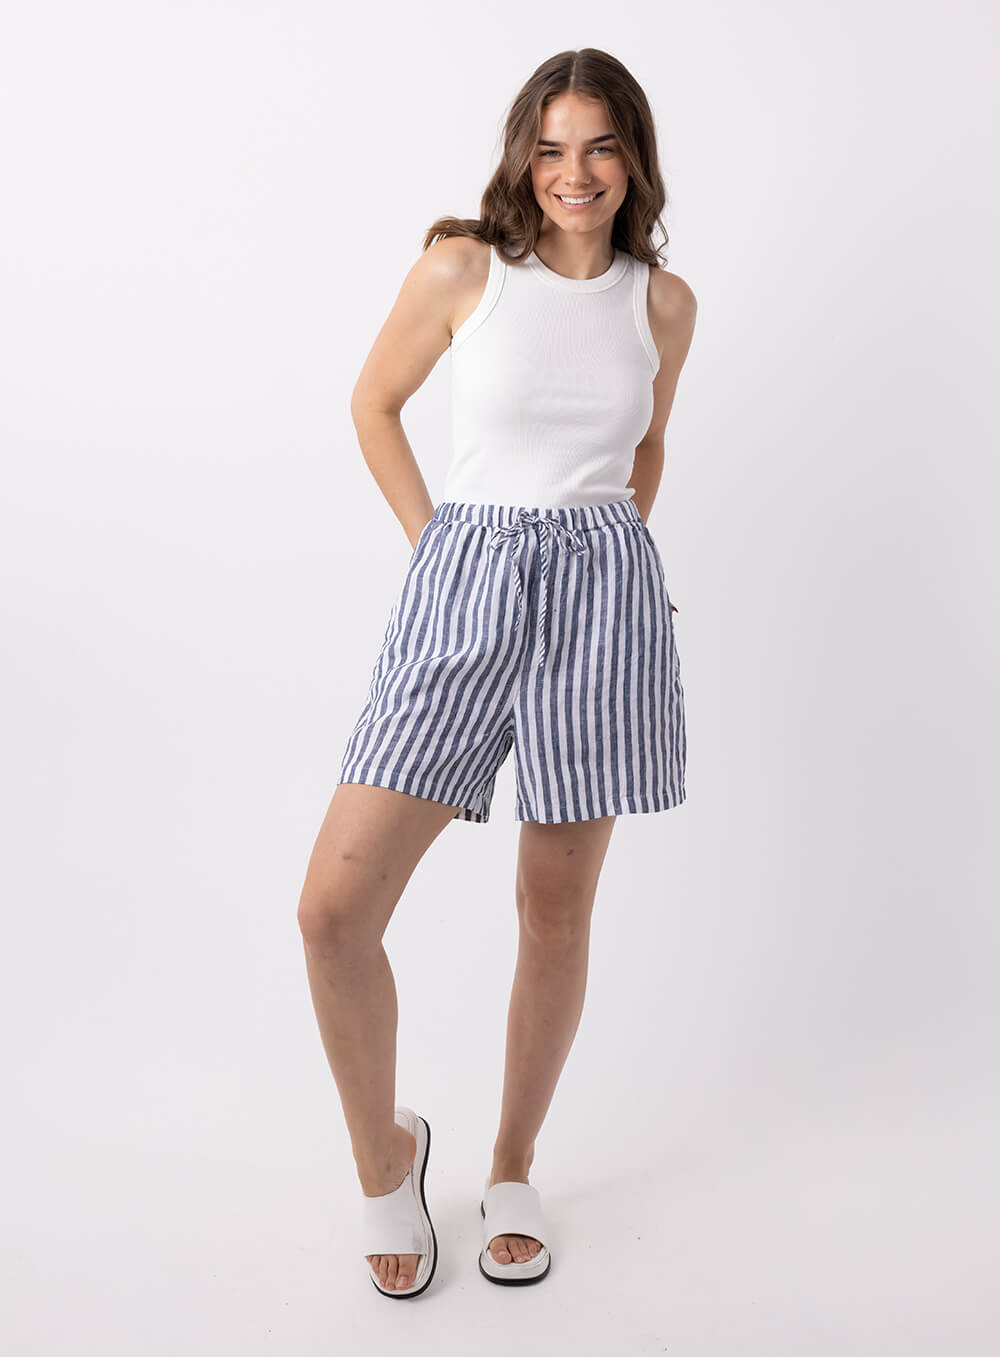 Abbi Stripe linen short in navy and white with elastic tie waist. Loose fit and mid thigh length